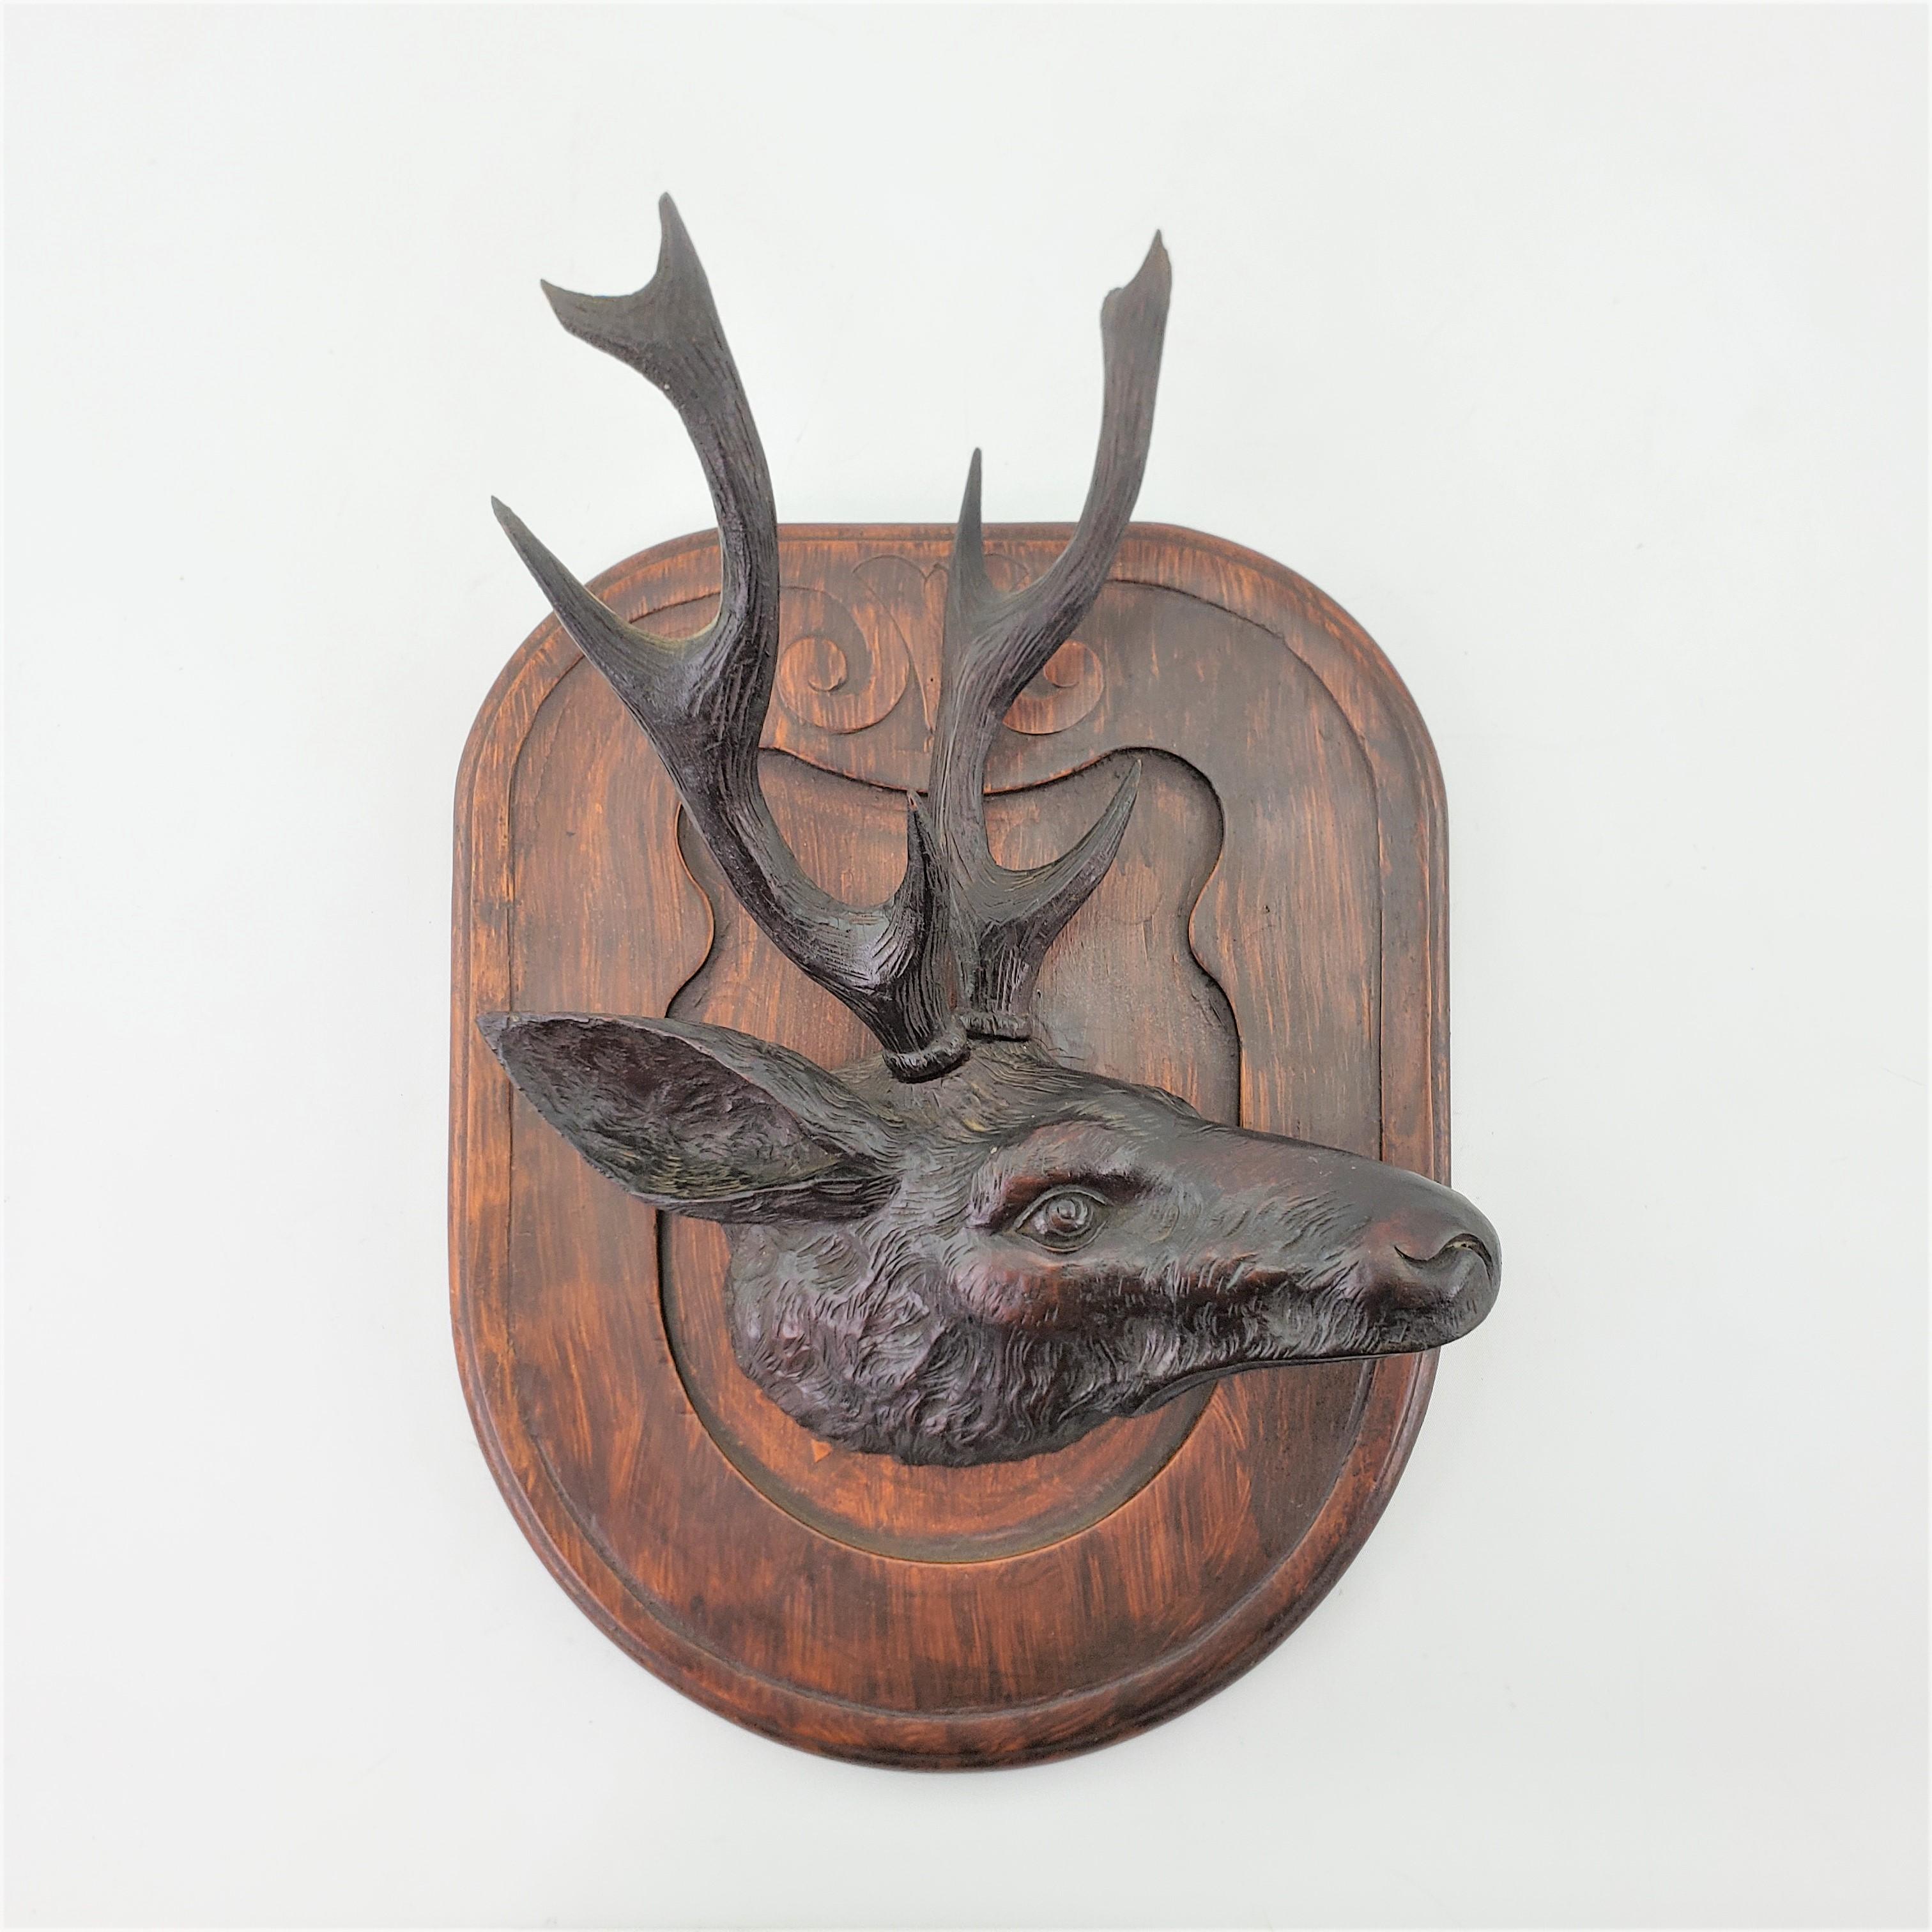 This well executed antique wall sculpture is unsigned, but presumed to have been done in Switzerland in approximately 1890 in the period Black Forest style. This hand-carved sculpture depicts the head of a deer or elk and is mounted on a wall plaque